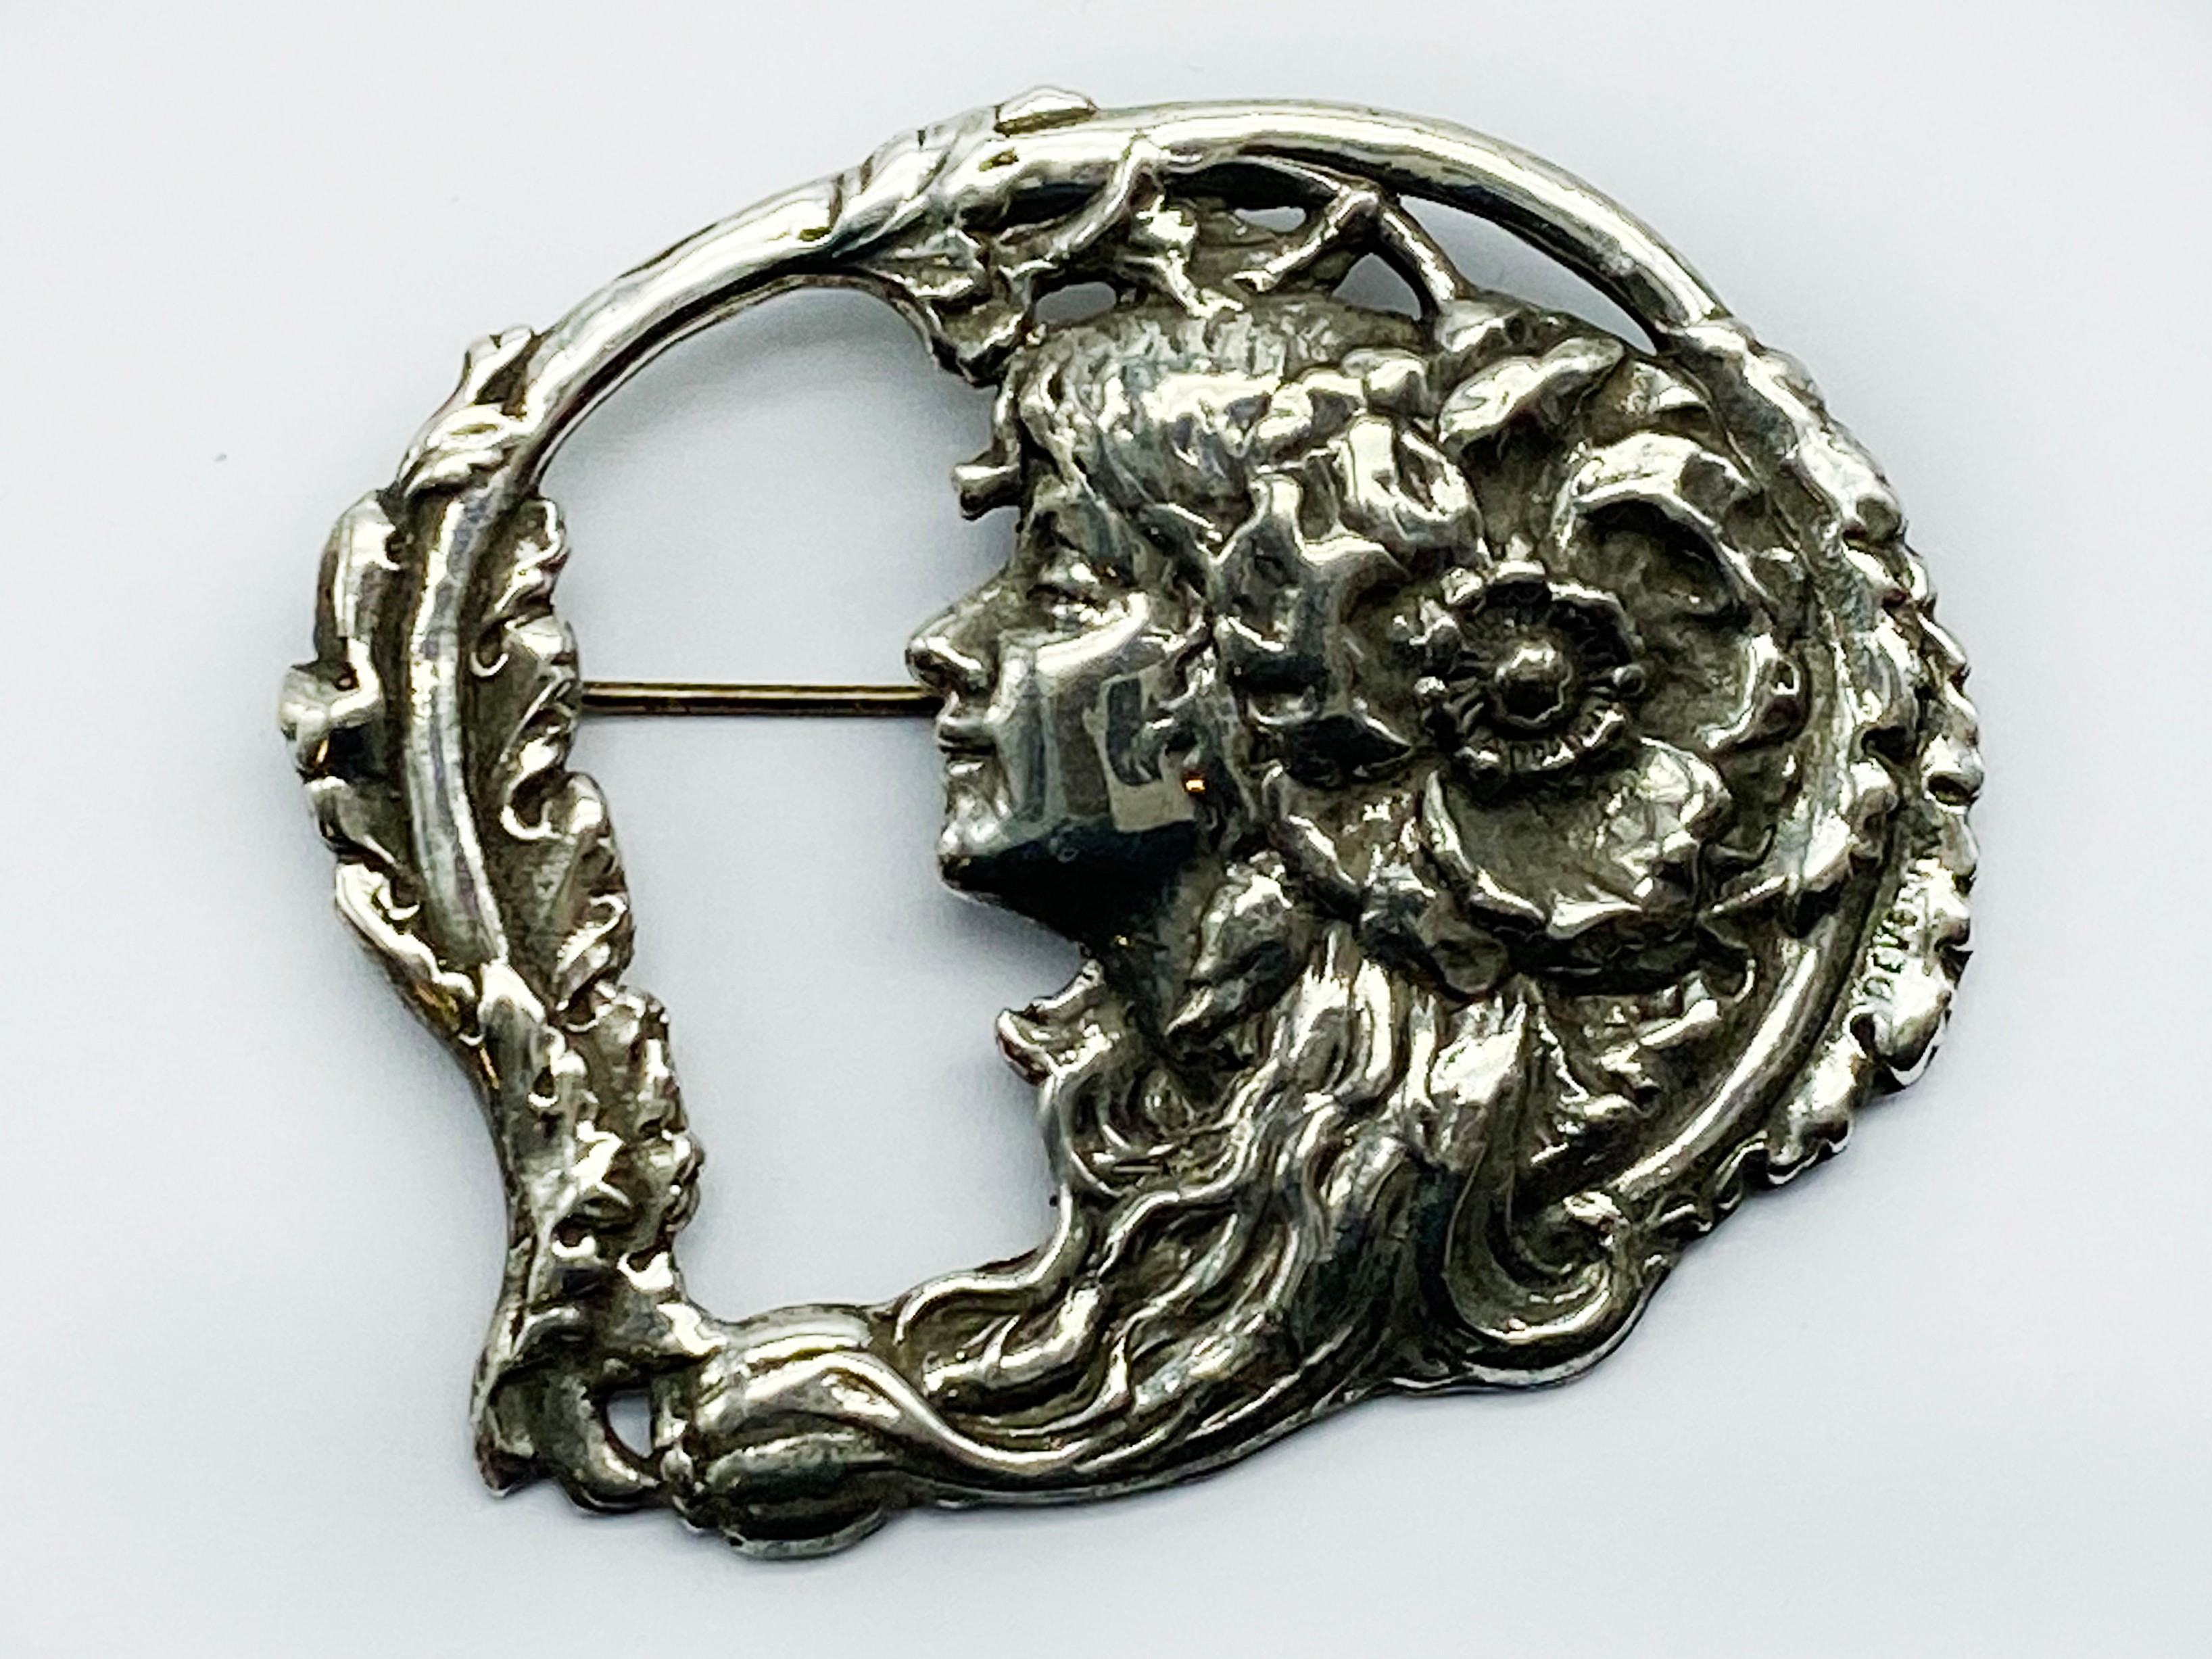 VINTAGE LARGE HALLMARKED SILVER BROOCH IN ART NOUVEAU STYLE - Image 2 of 3